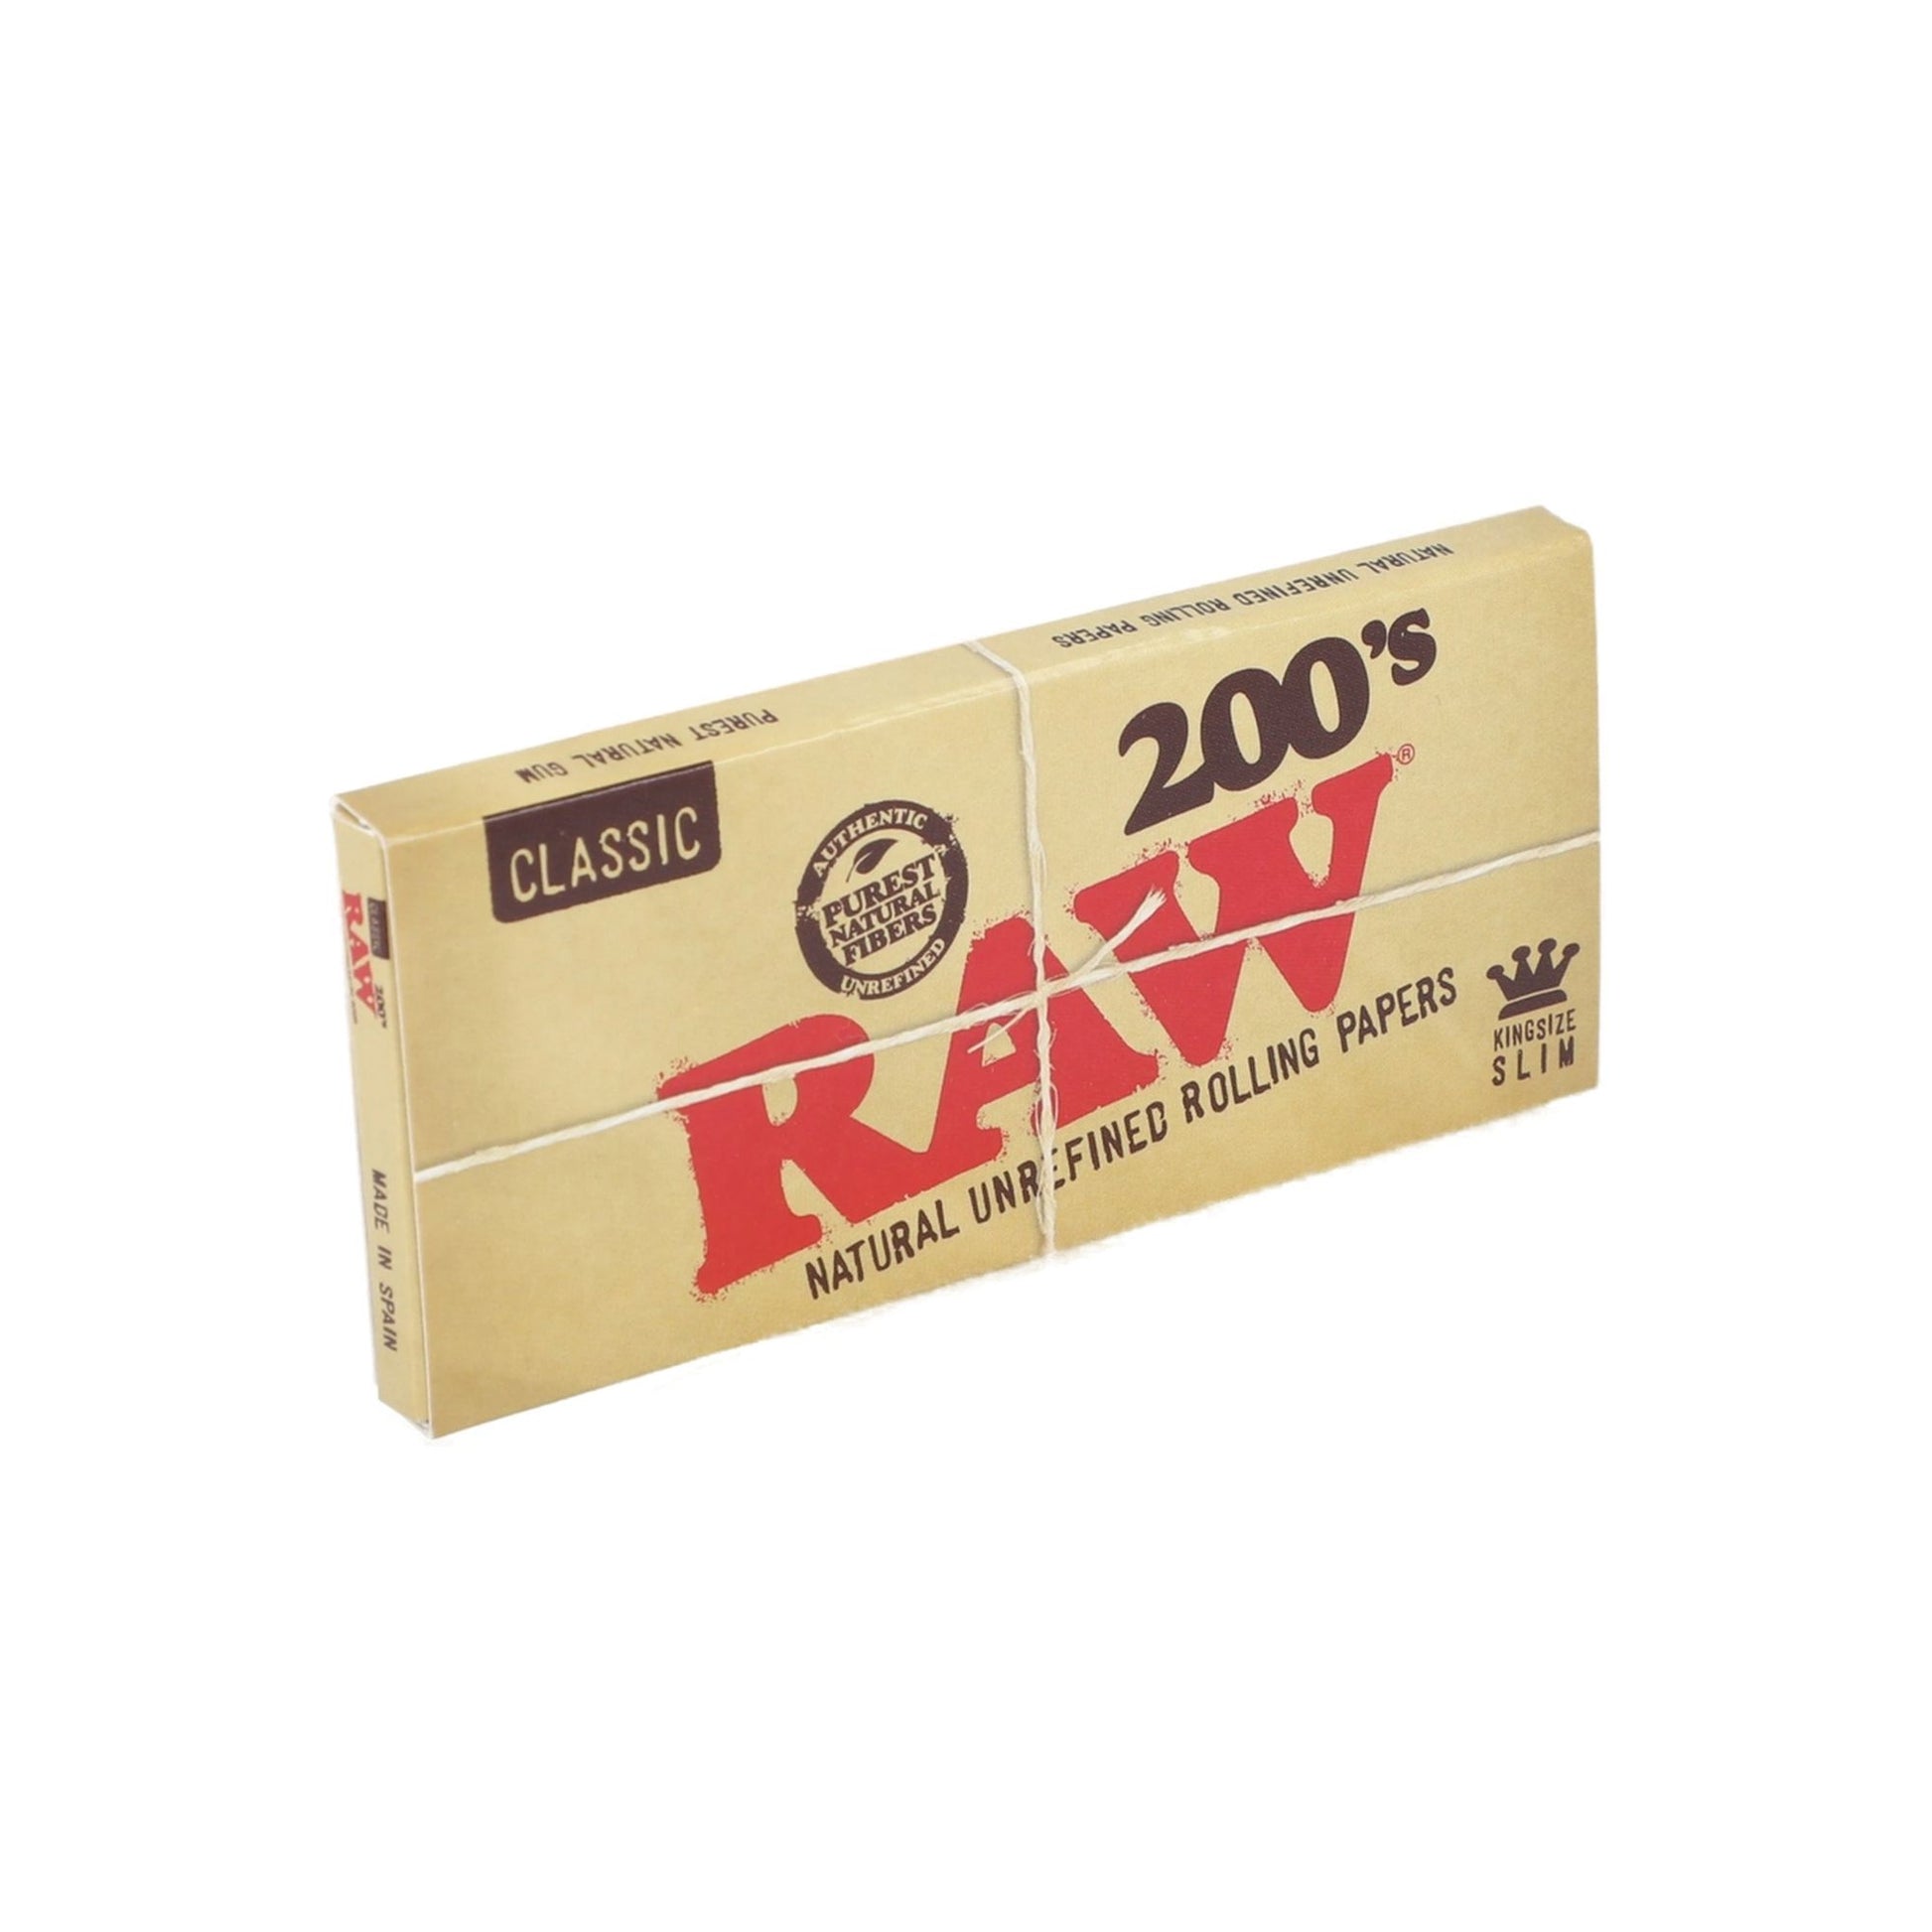 RAW Classic King Size Creaseless Rolling Paper 200 leaves HighJack India